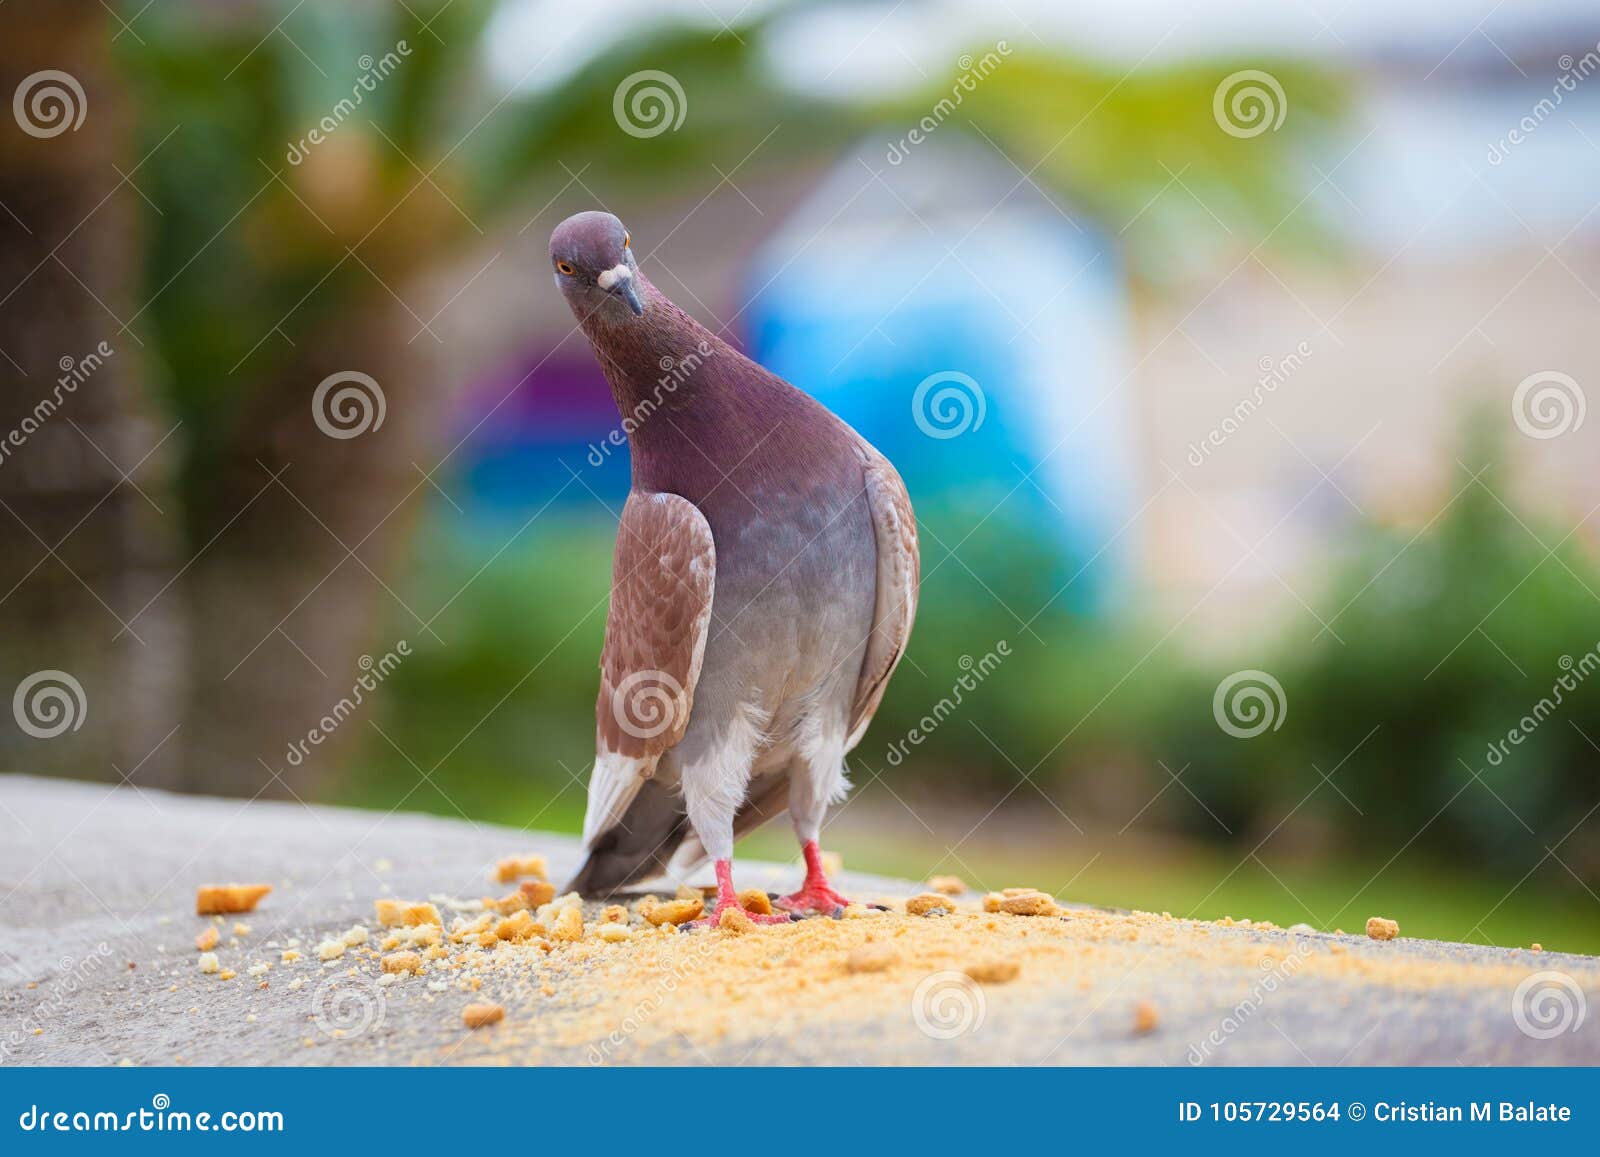 Funny Pigeon Outdoor, in Tenerife Stock Photo - Image of wing, single:  105729564